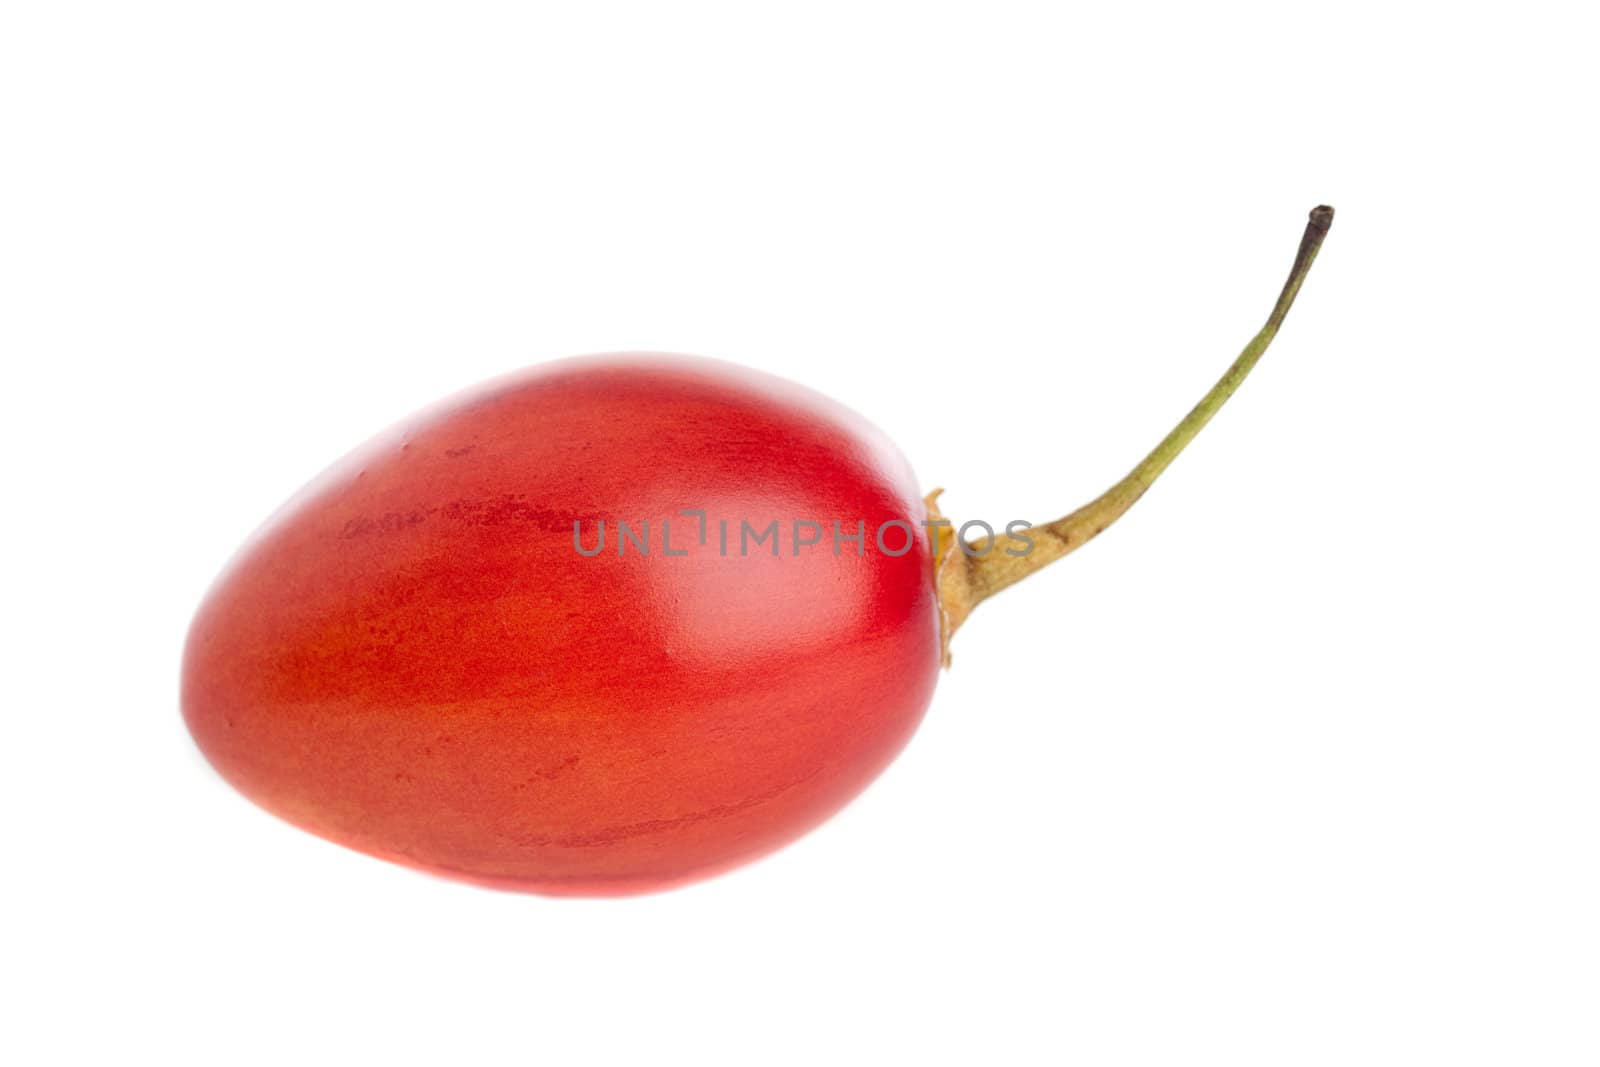 Juicy red tamarillo on white background